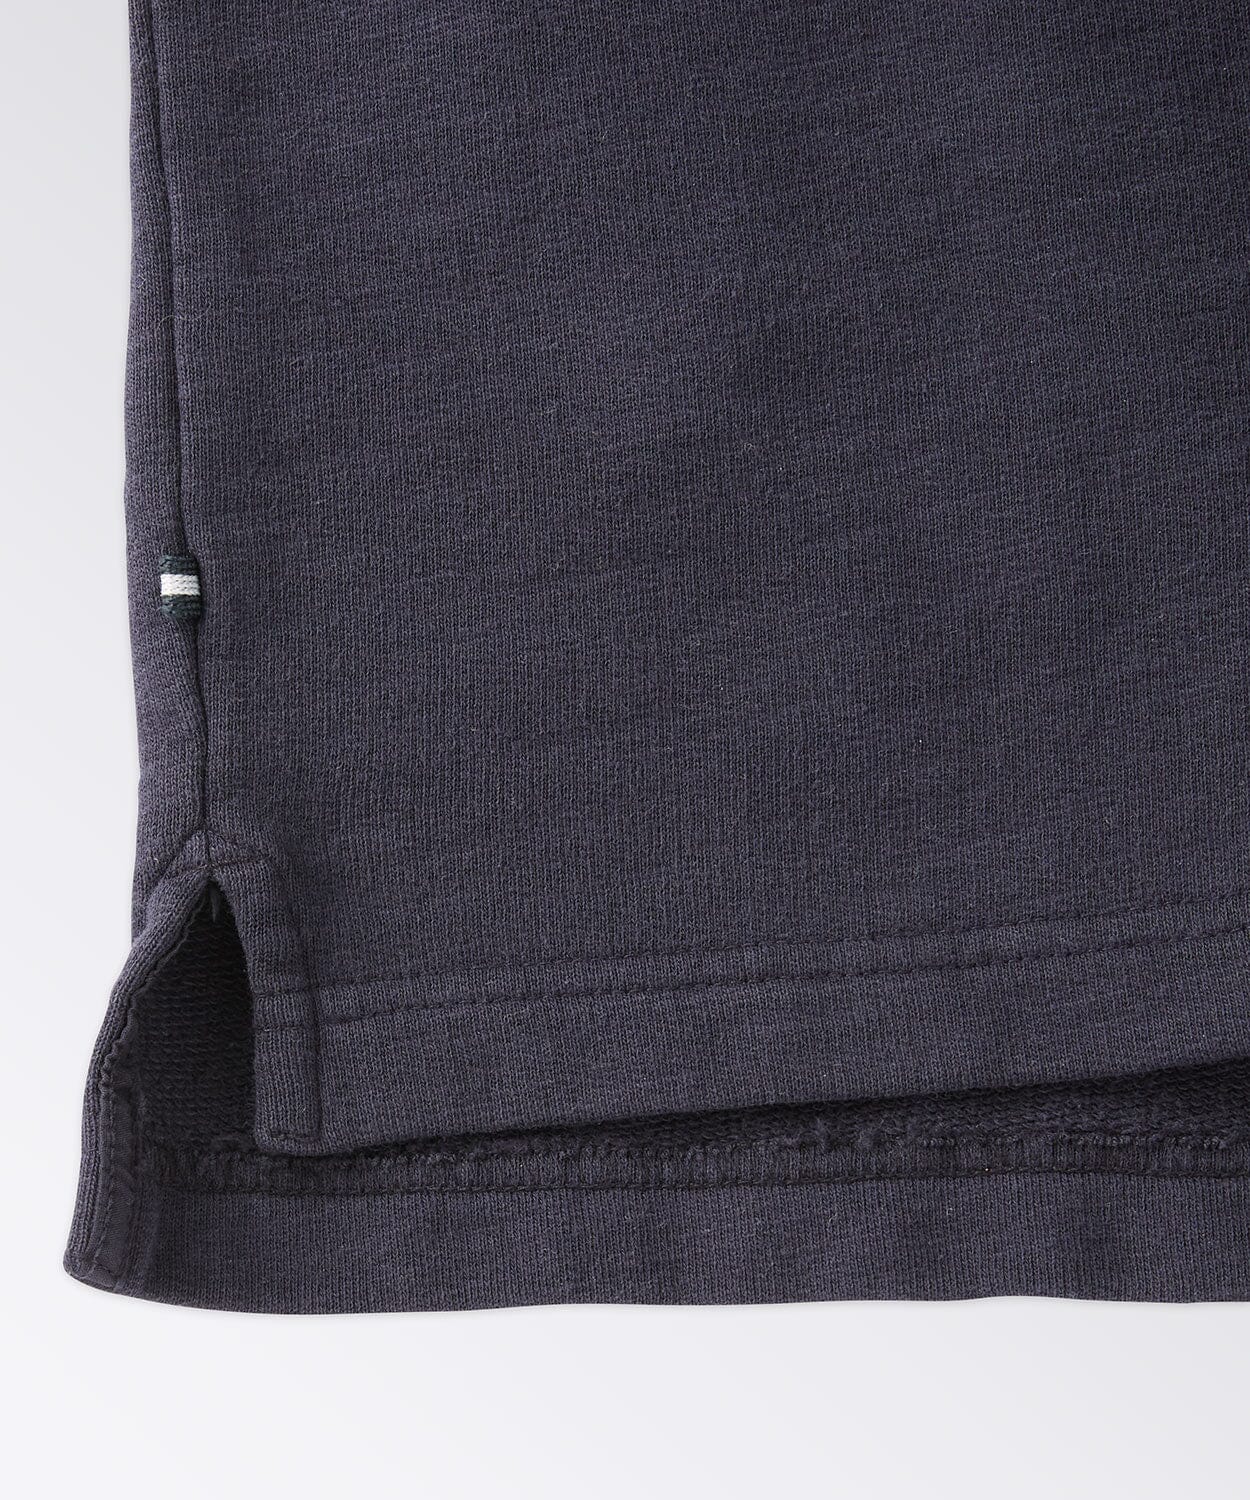 Close up of Small Tab Label on Side Seam